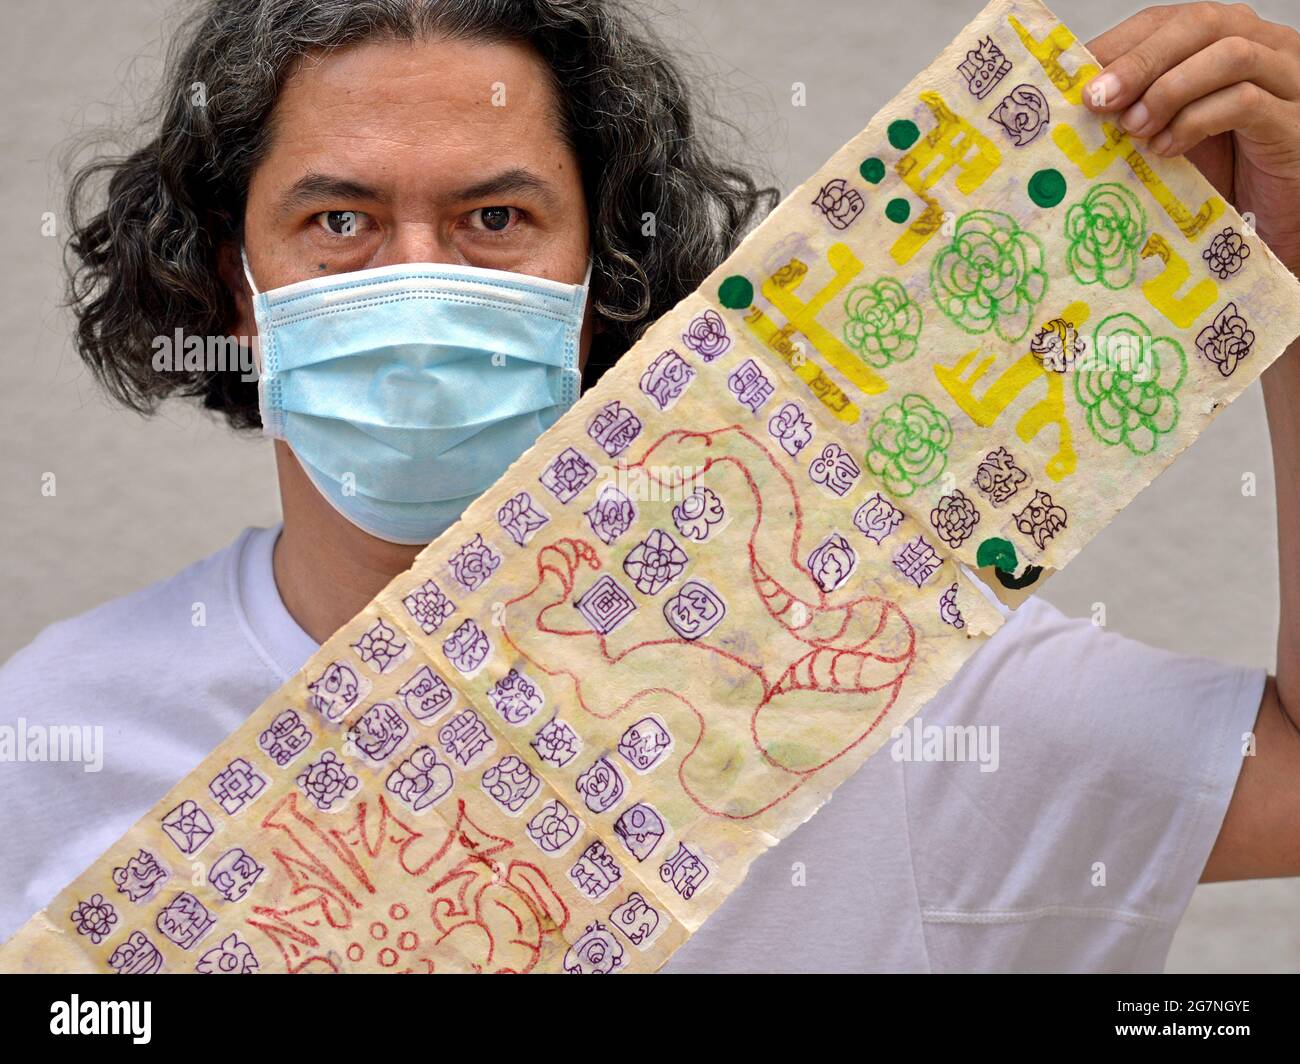 Mexican Yucatecan graphic artist and researcher of Maya history shows a hand-crafted and hand-painted leporello with Maya script (Maya glyphs). Stock Photo